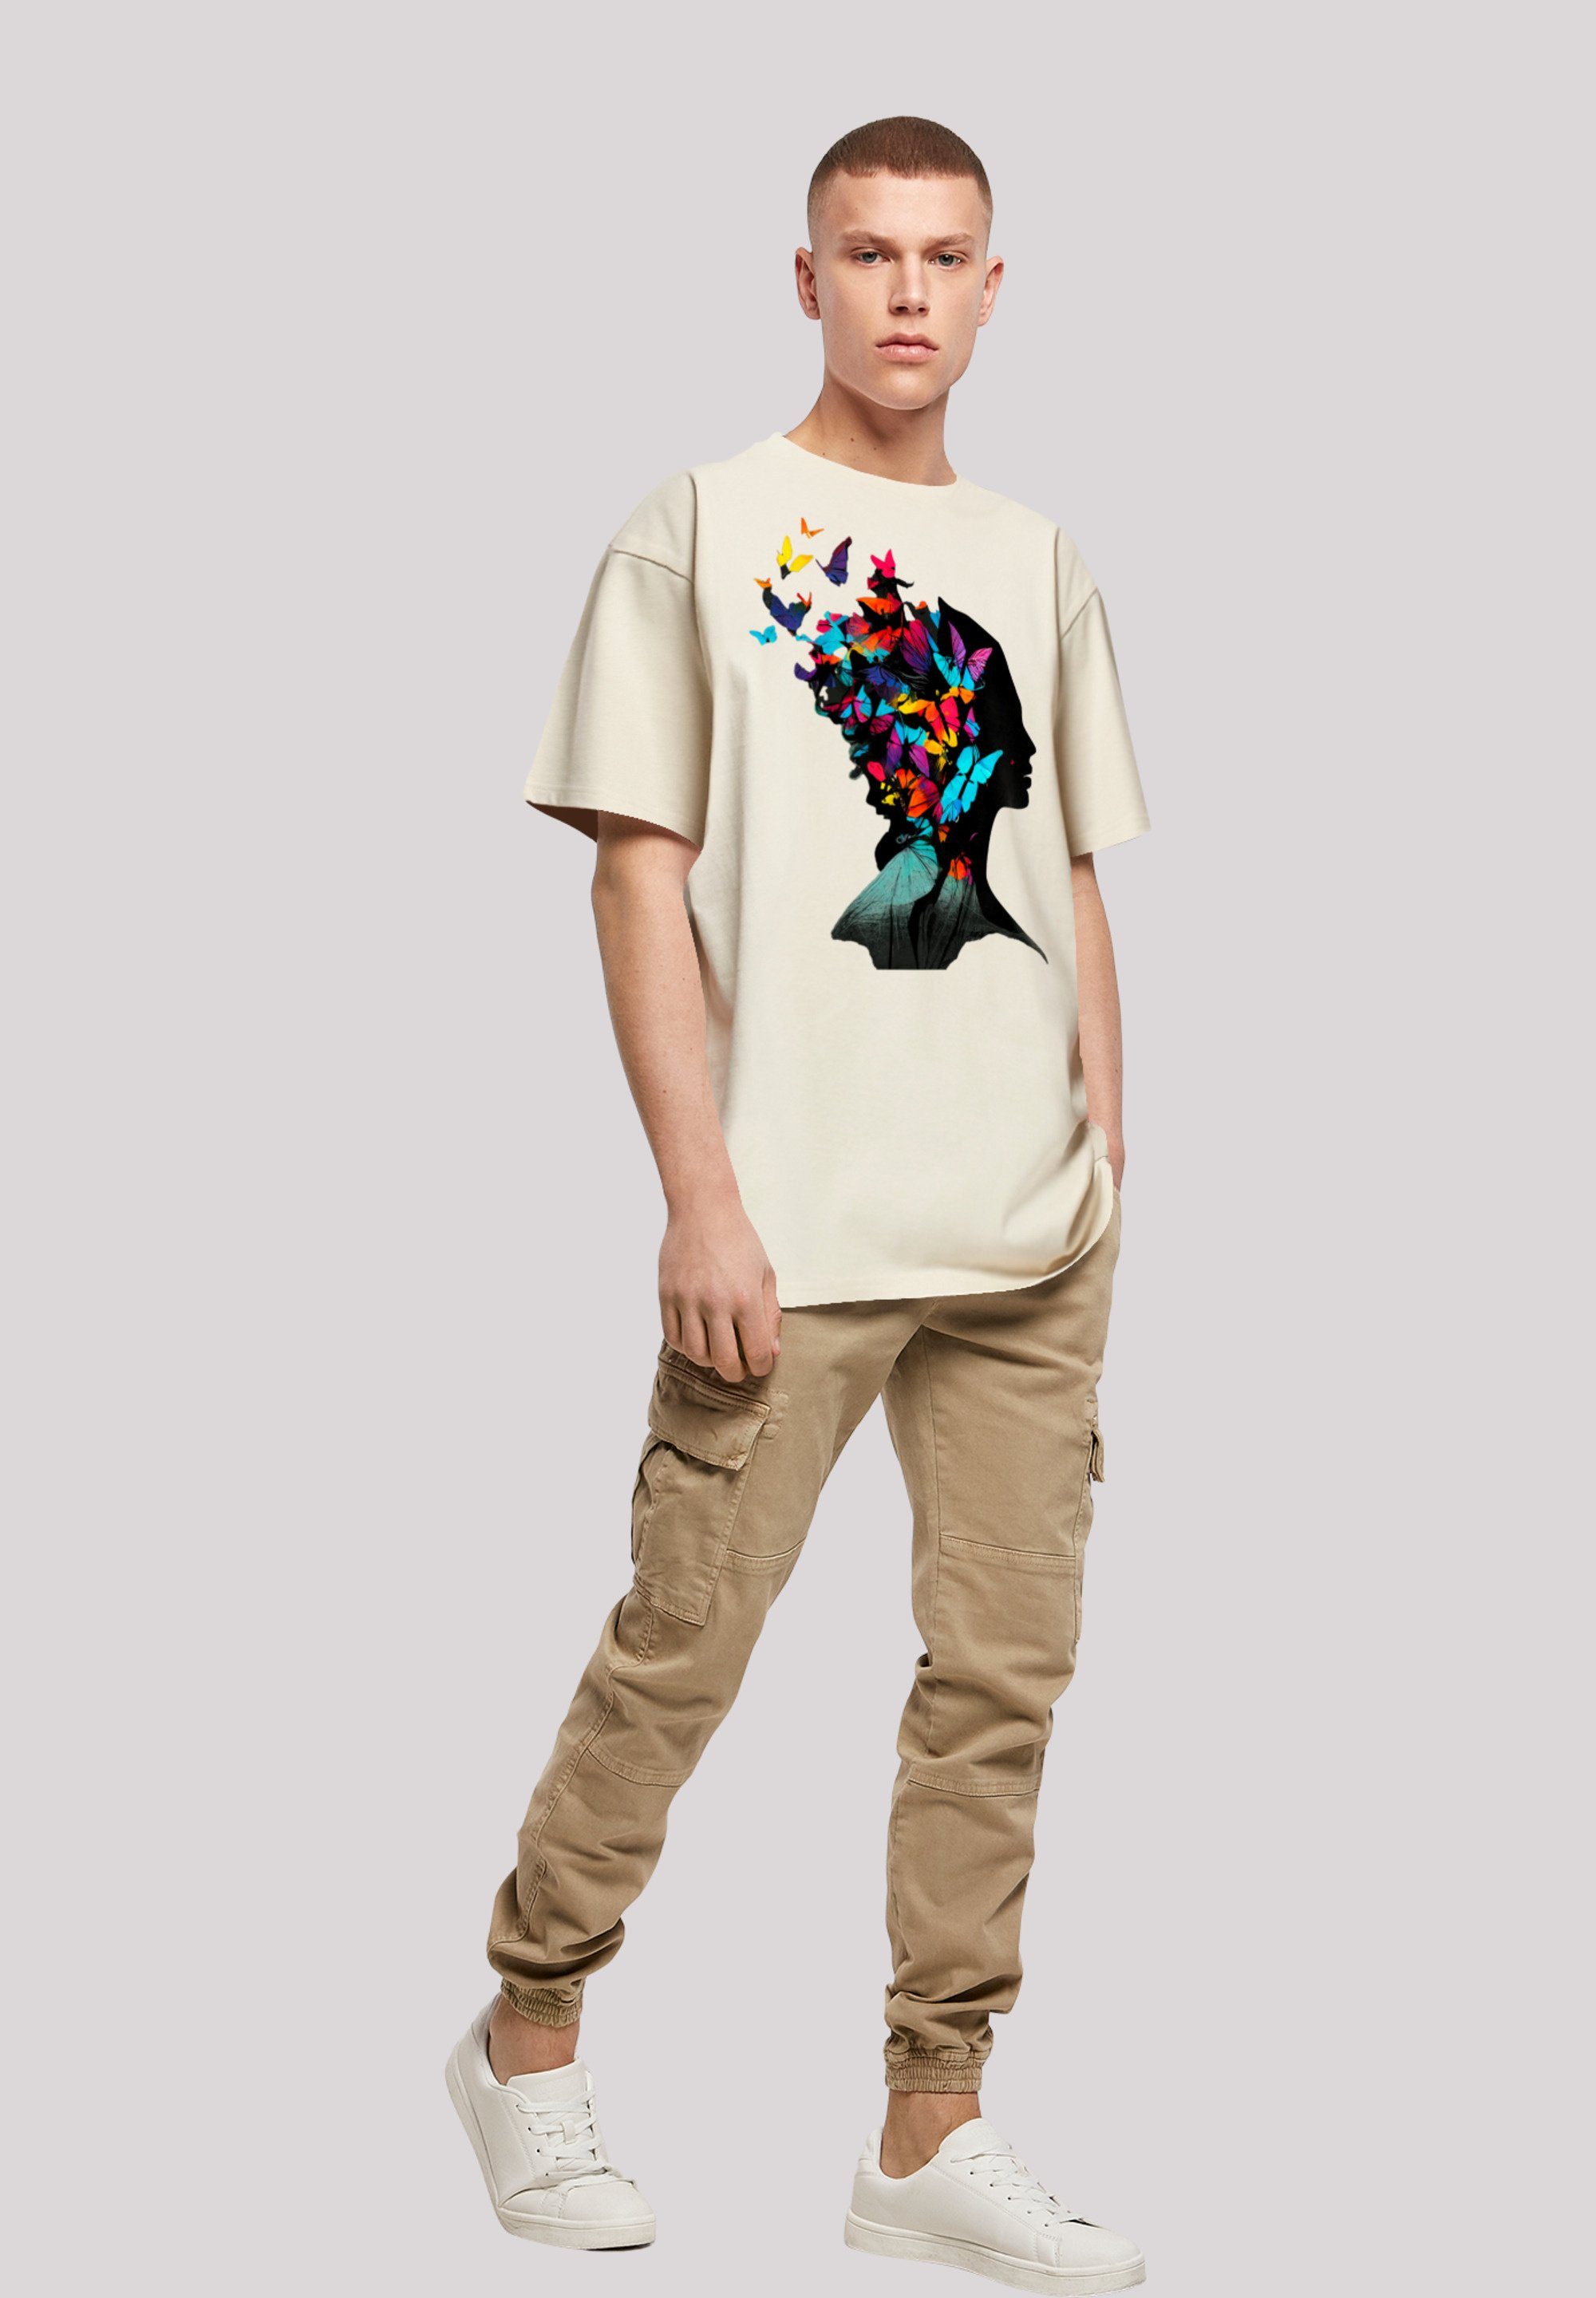 Schmetterling Print F4NT4STIC TEE Silhouette OVERSIZE sand T-Shirt